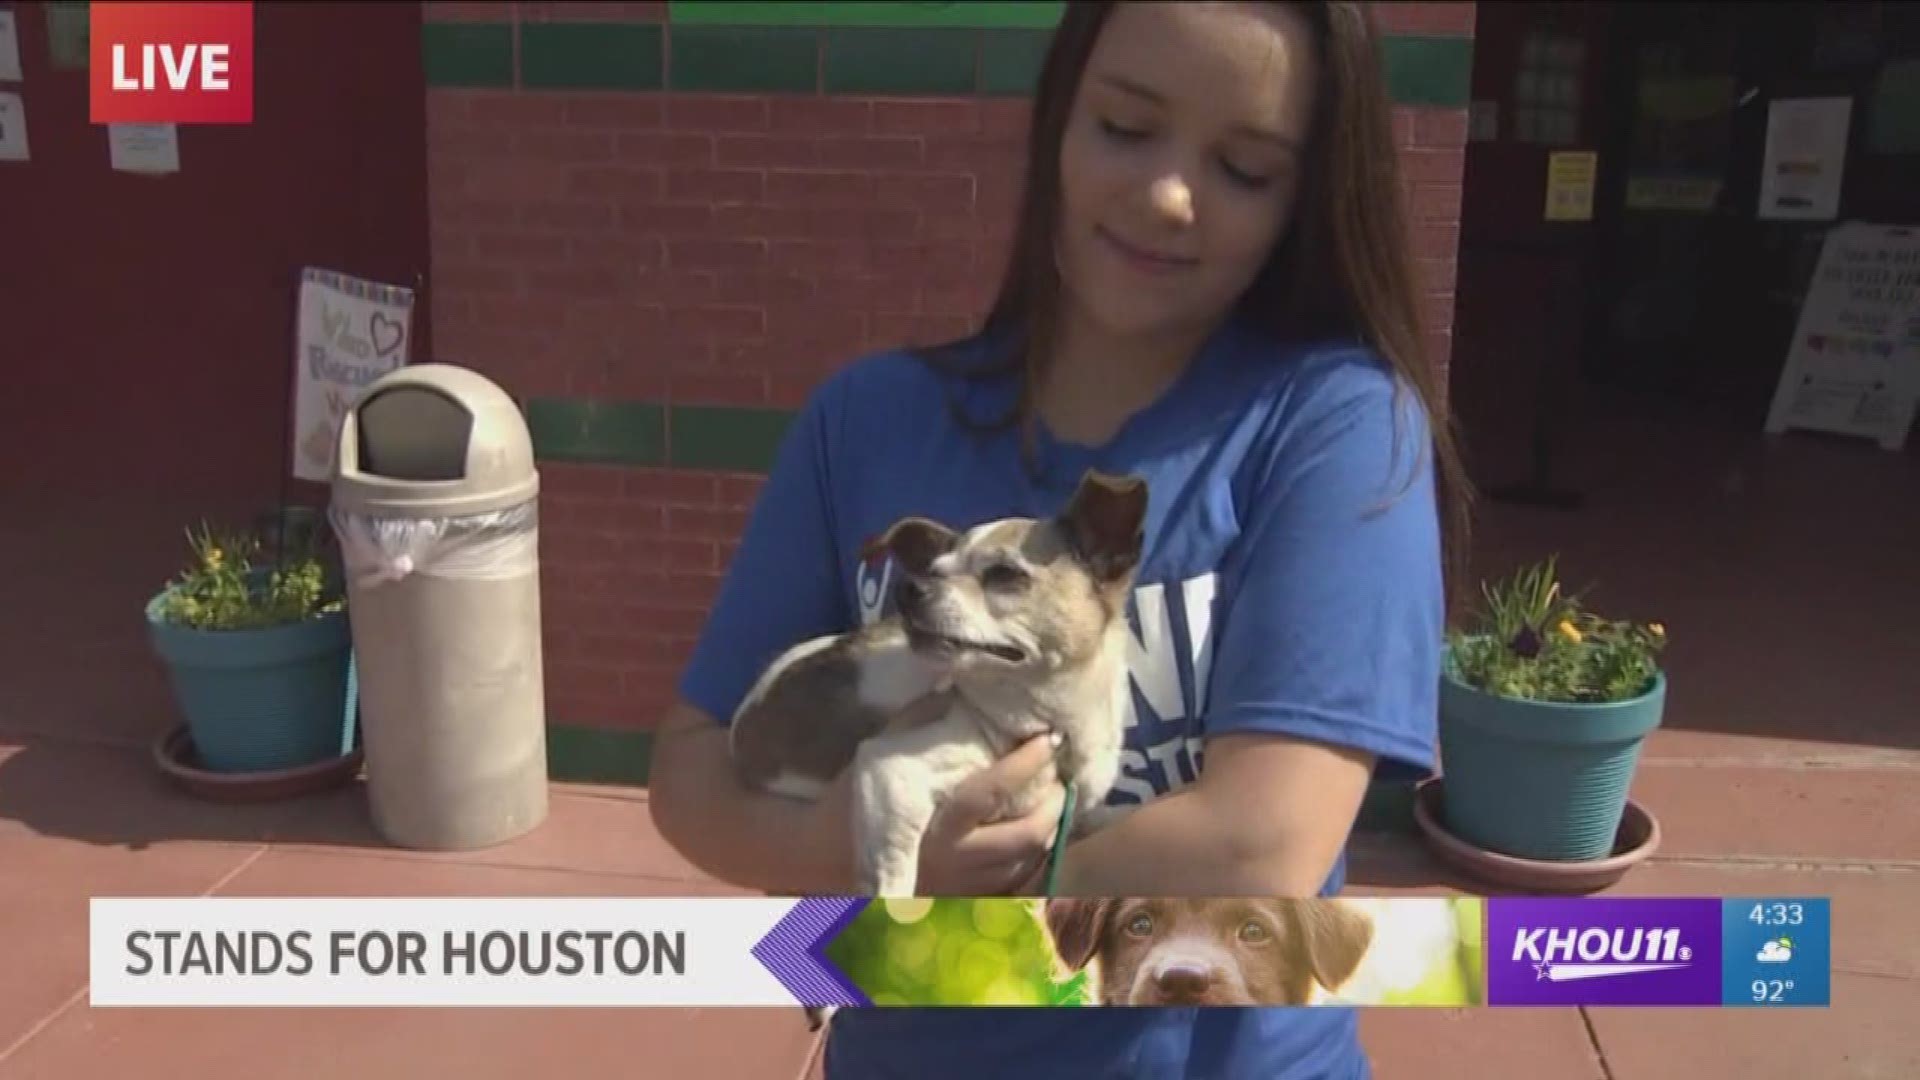 KHOU 11's Lisa Hernandez, Russ Lewis, and Jason Miles are live at the Harris County Animal Shelter where hundreds of animals are available for adoption. 